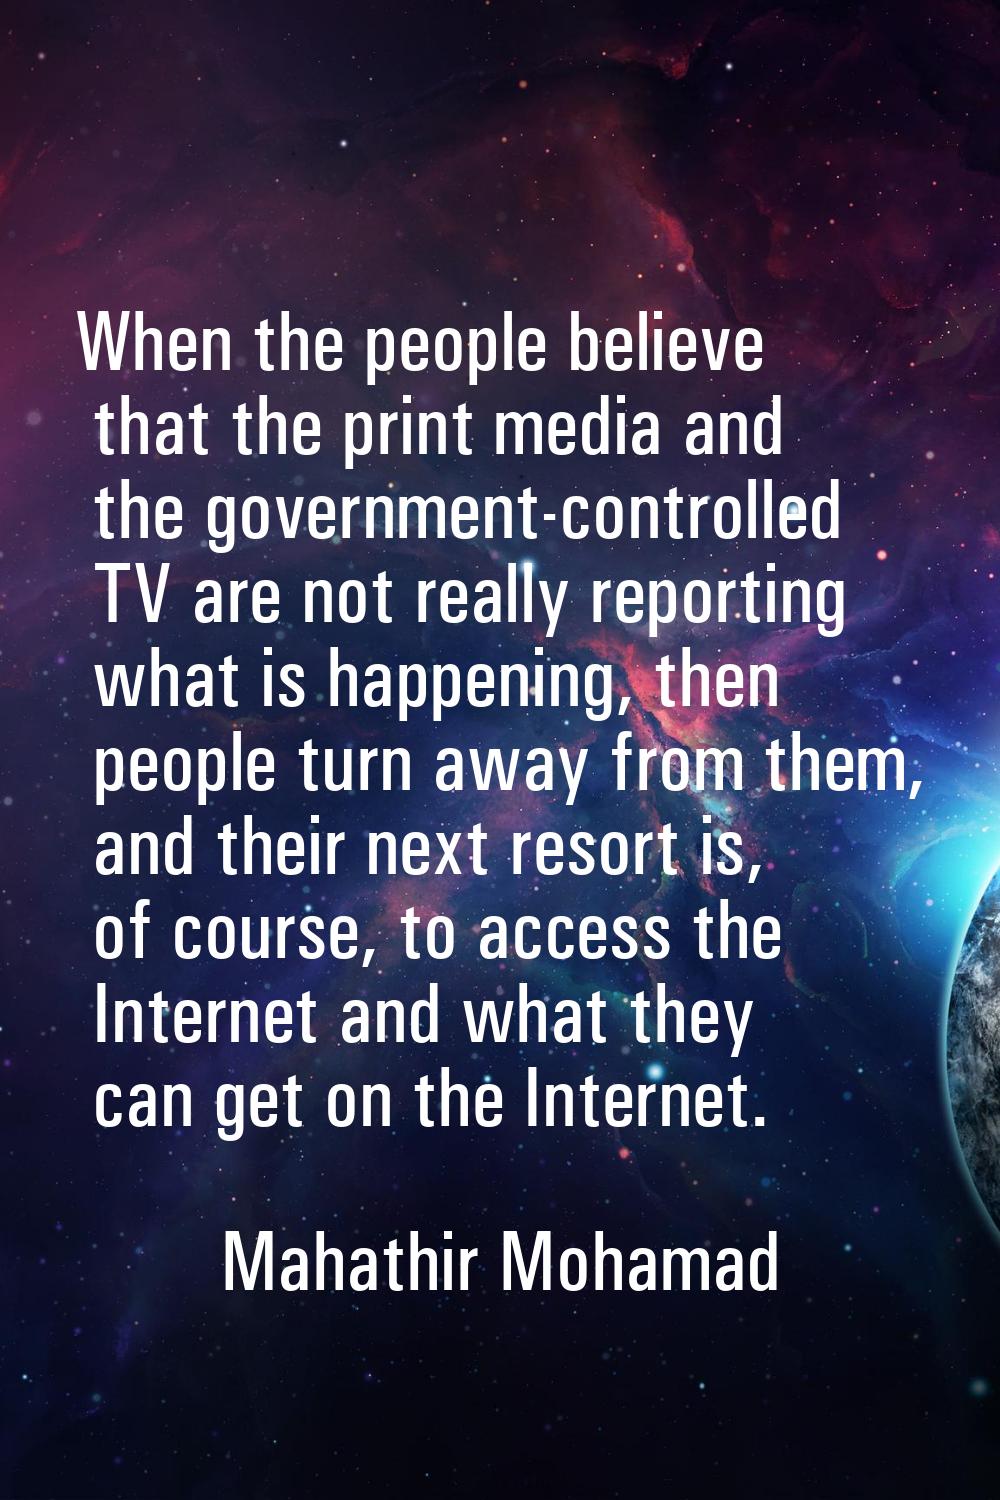 When the people believe that the print media and the government-controlled TV are not really report